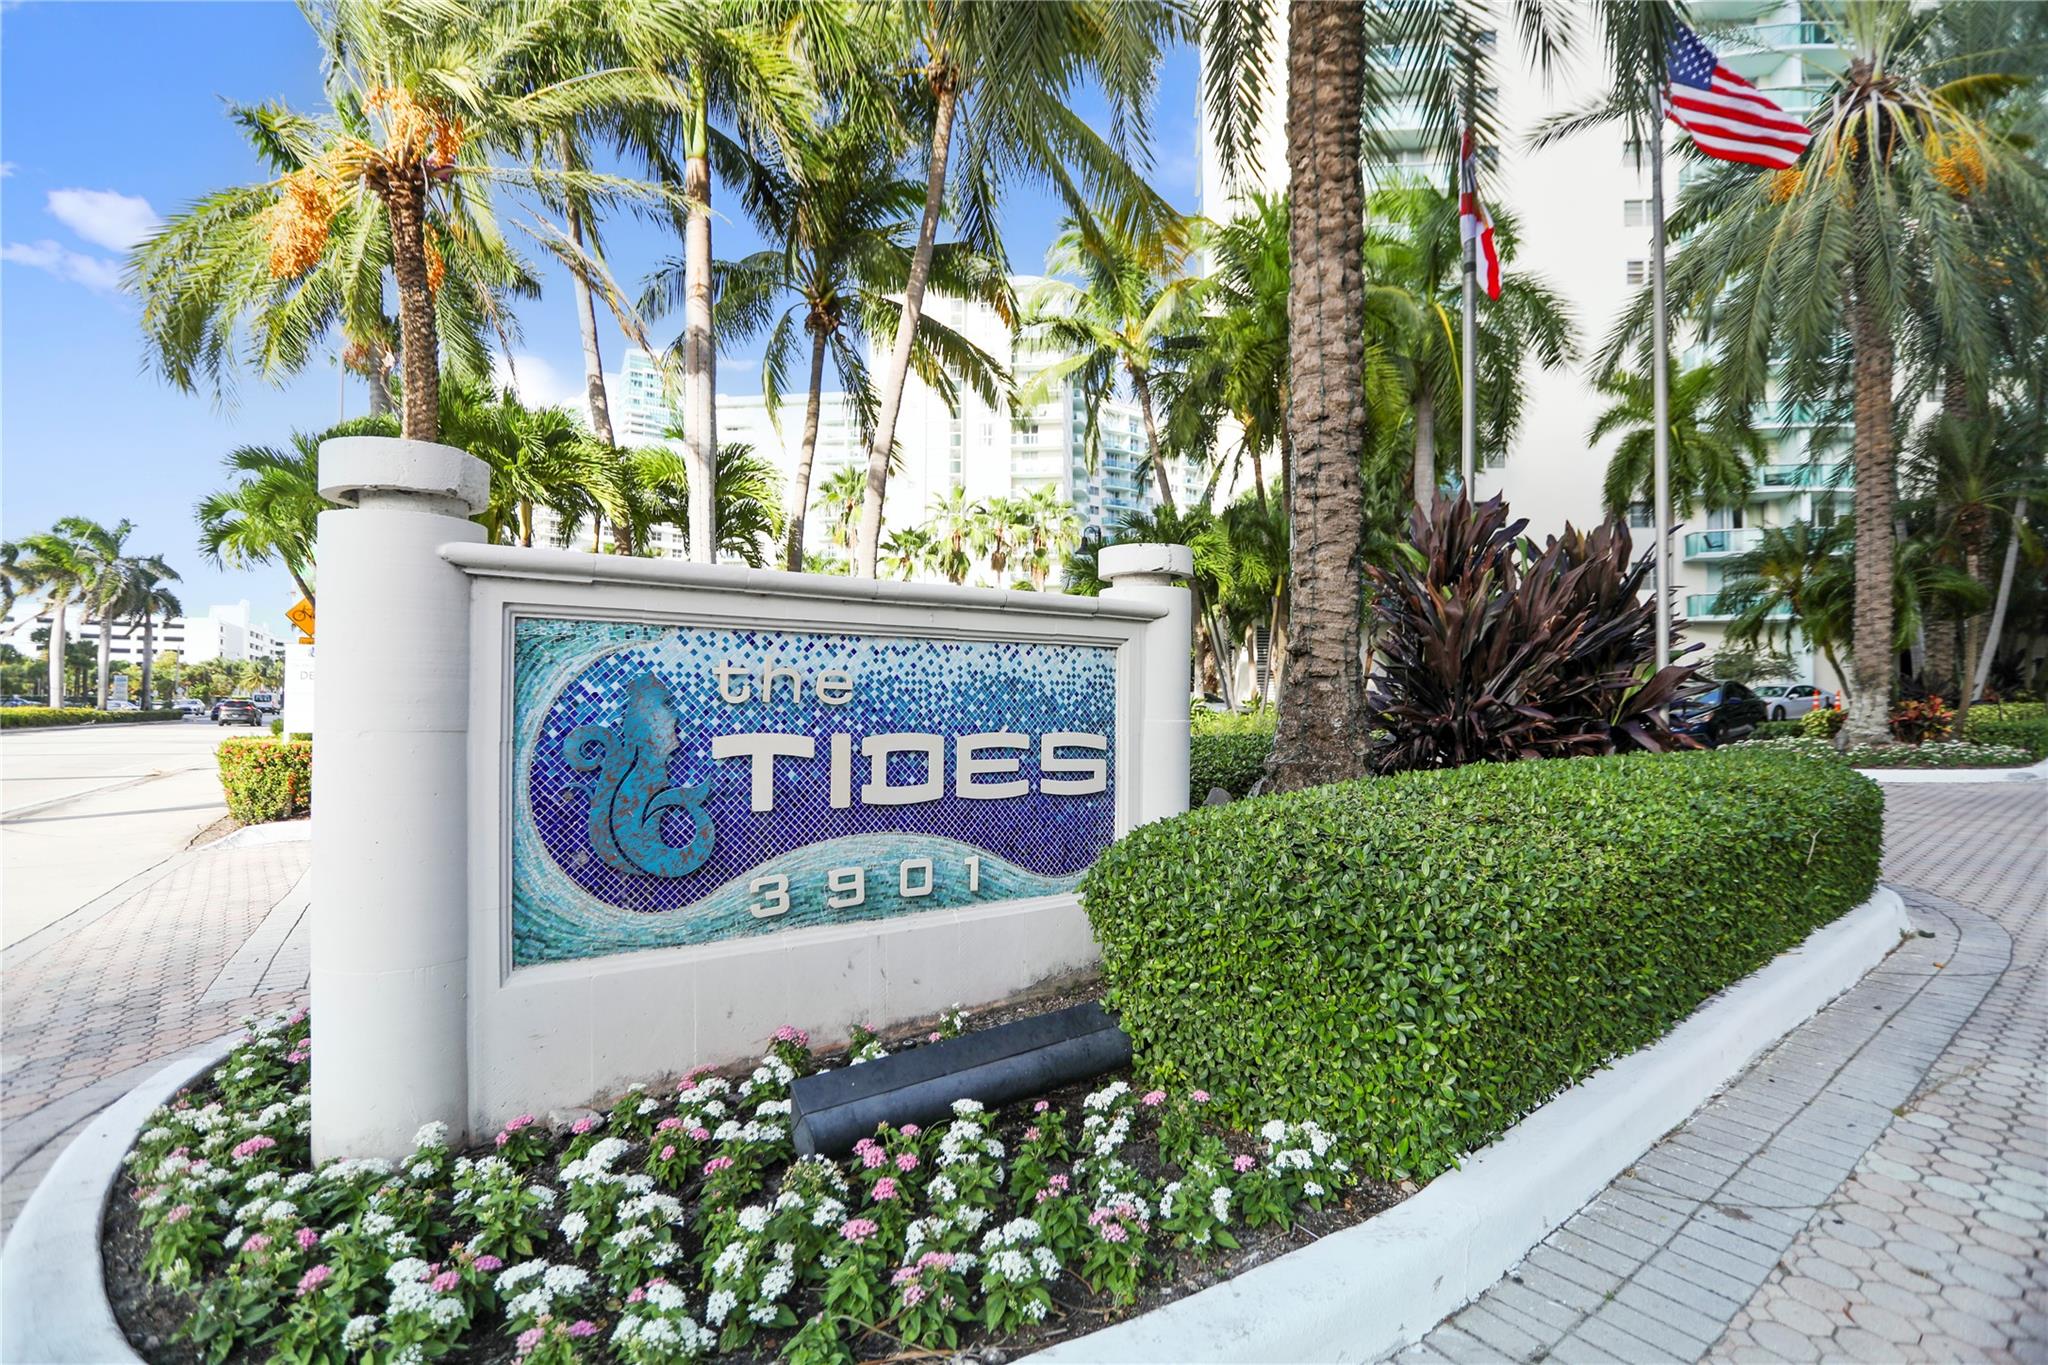 4th floor at the tides; wood floors throughout, completed furnished and decorated. Directo on the ocean with partia ocean view. Enjoy great amenities including Gym, pool, game room. not tower has a restaurant shop very convenience with service to pool and beach. Tourism love this place to spend their vacation. Building is very familiar secure and great located.